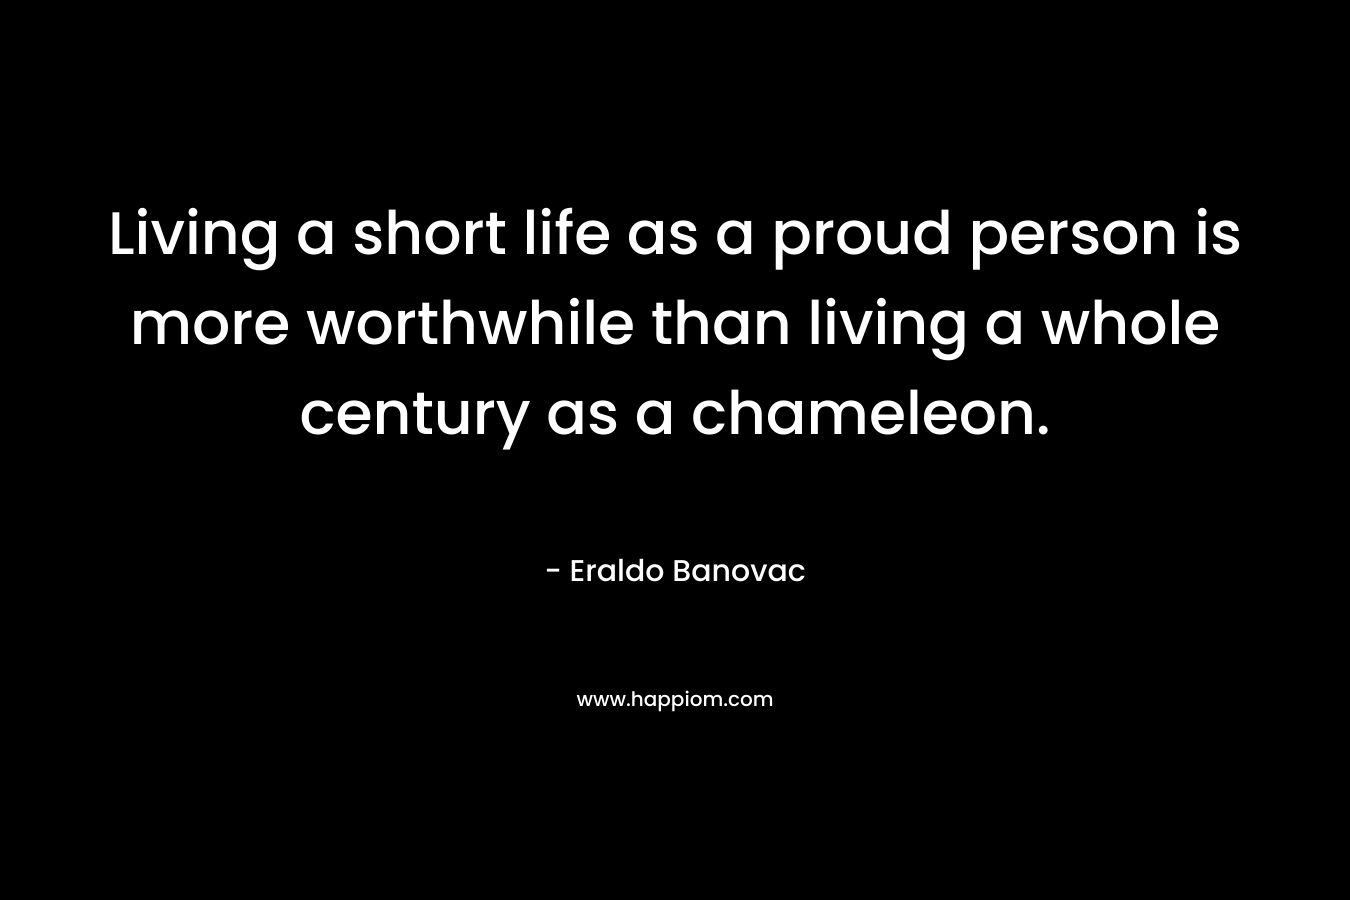 Living a short life as a proud person is more worthwhile than living a whole century as a chameleon.